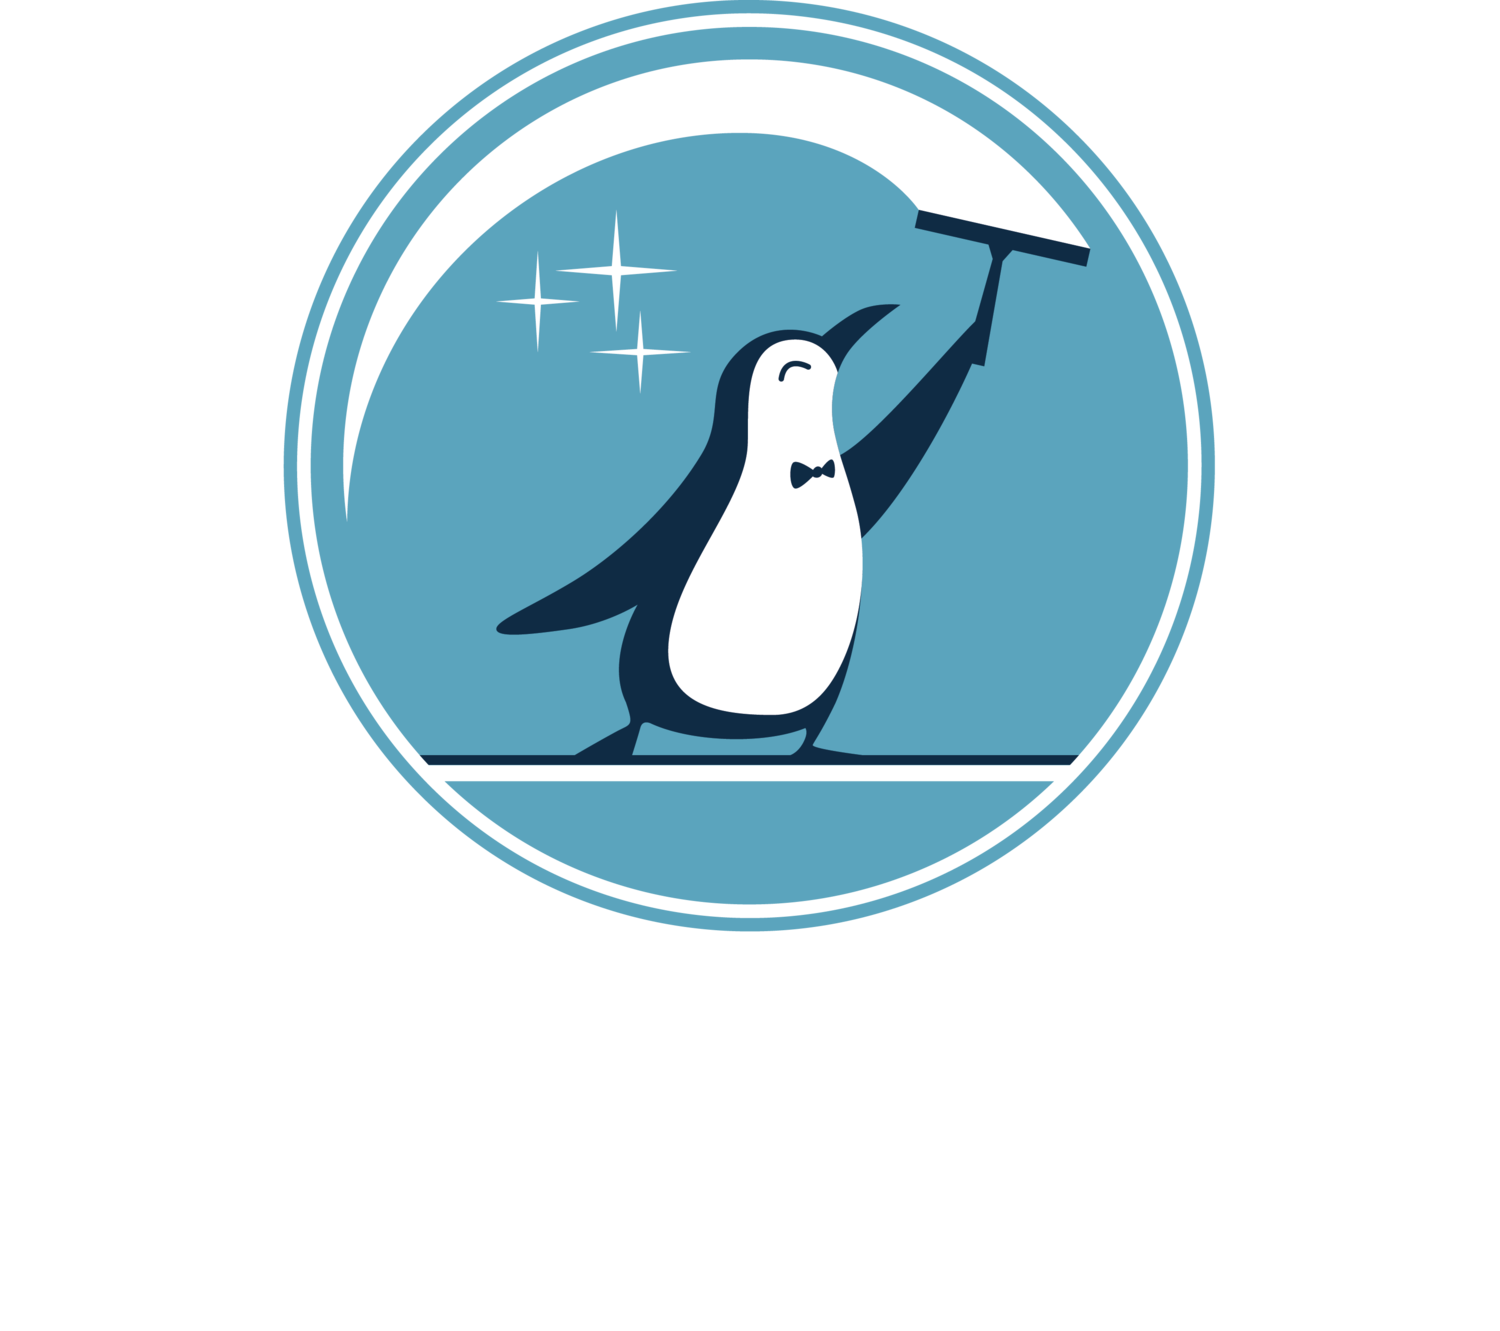 Win clipart window sill. Sparkles glistens cleaning 